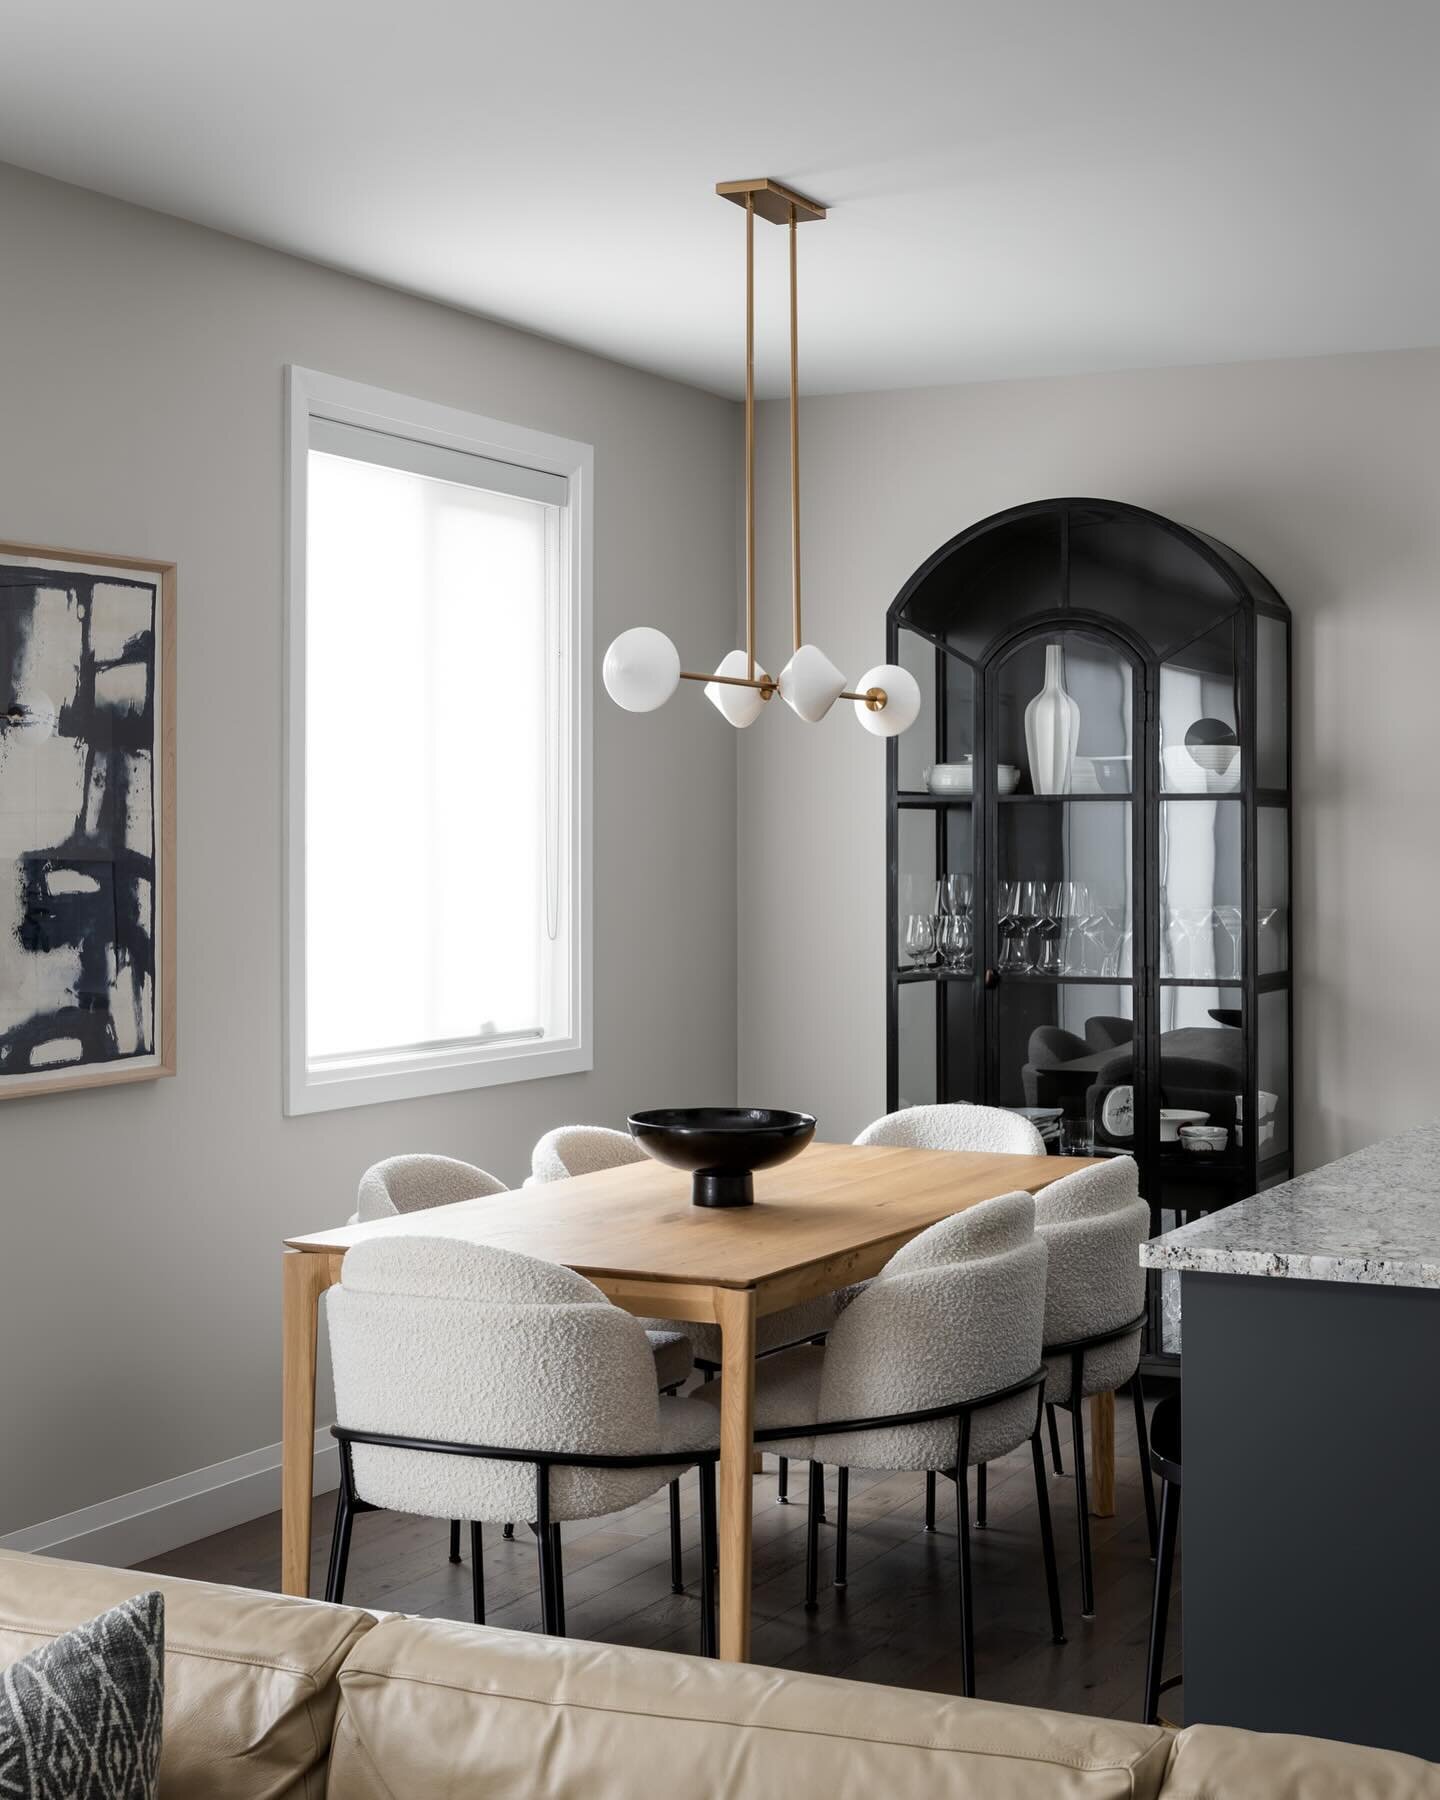 Dining room dreams

This house is currently for sale! Contact @annastrikrealestate for more information

Design: @studio.moffatt
Captured by: @swizzler 

#interiordesign 
#interiordesigner
#interiordesignideas
 #interiordecorideas
#interiorstyling
#d